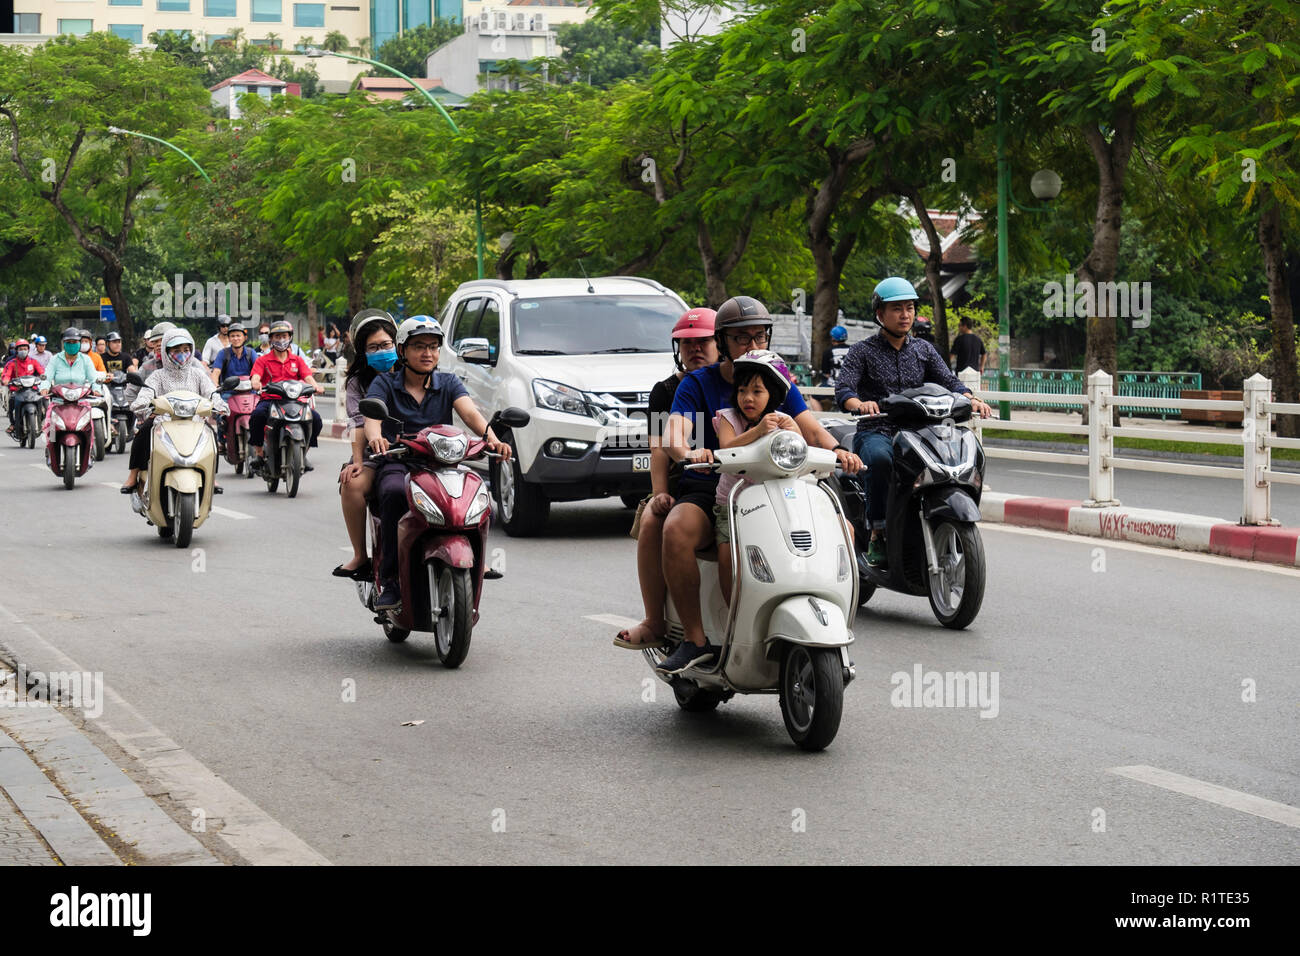 Street scene with people riding motorbikes and scooters on a busy city road. Hanoi, Vietnam, Asia Stock Photo